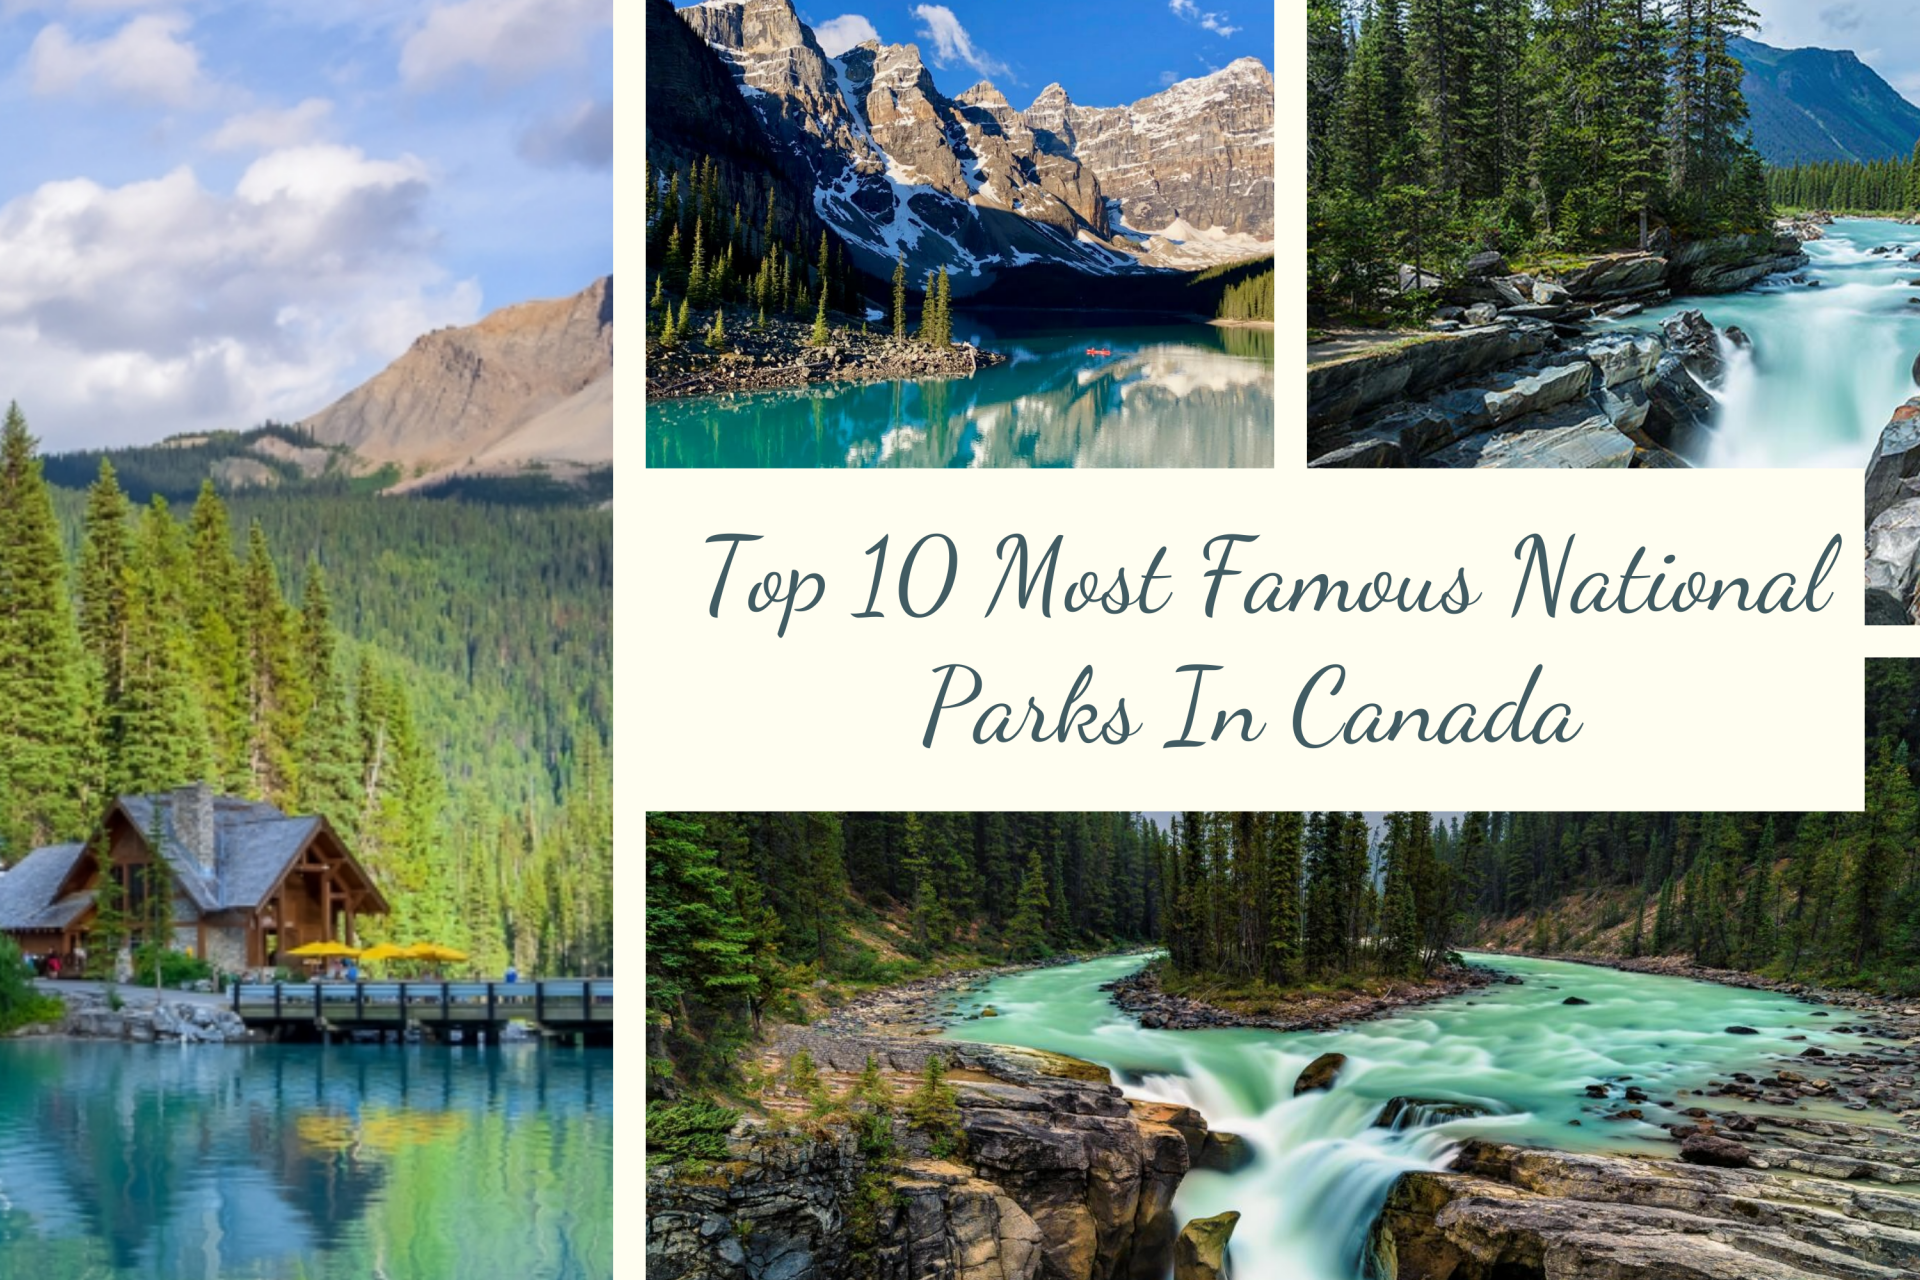 Top 10 Most Famous and Popular National Parks In Canada